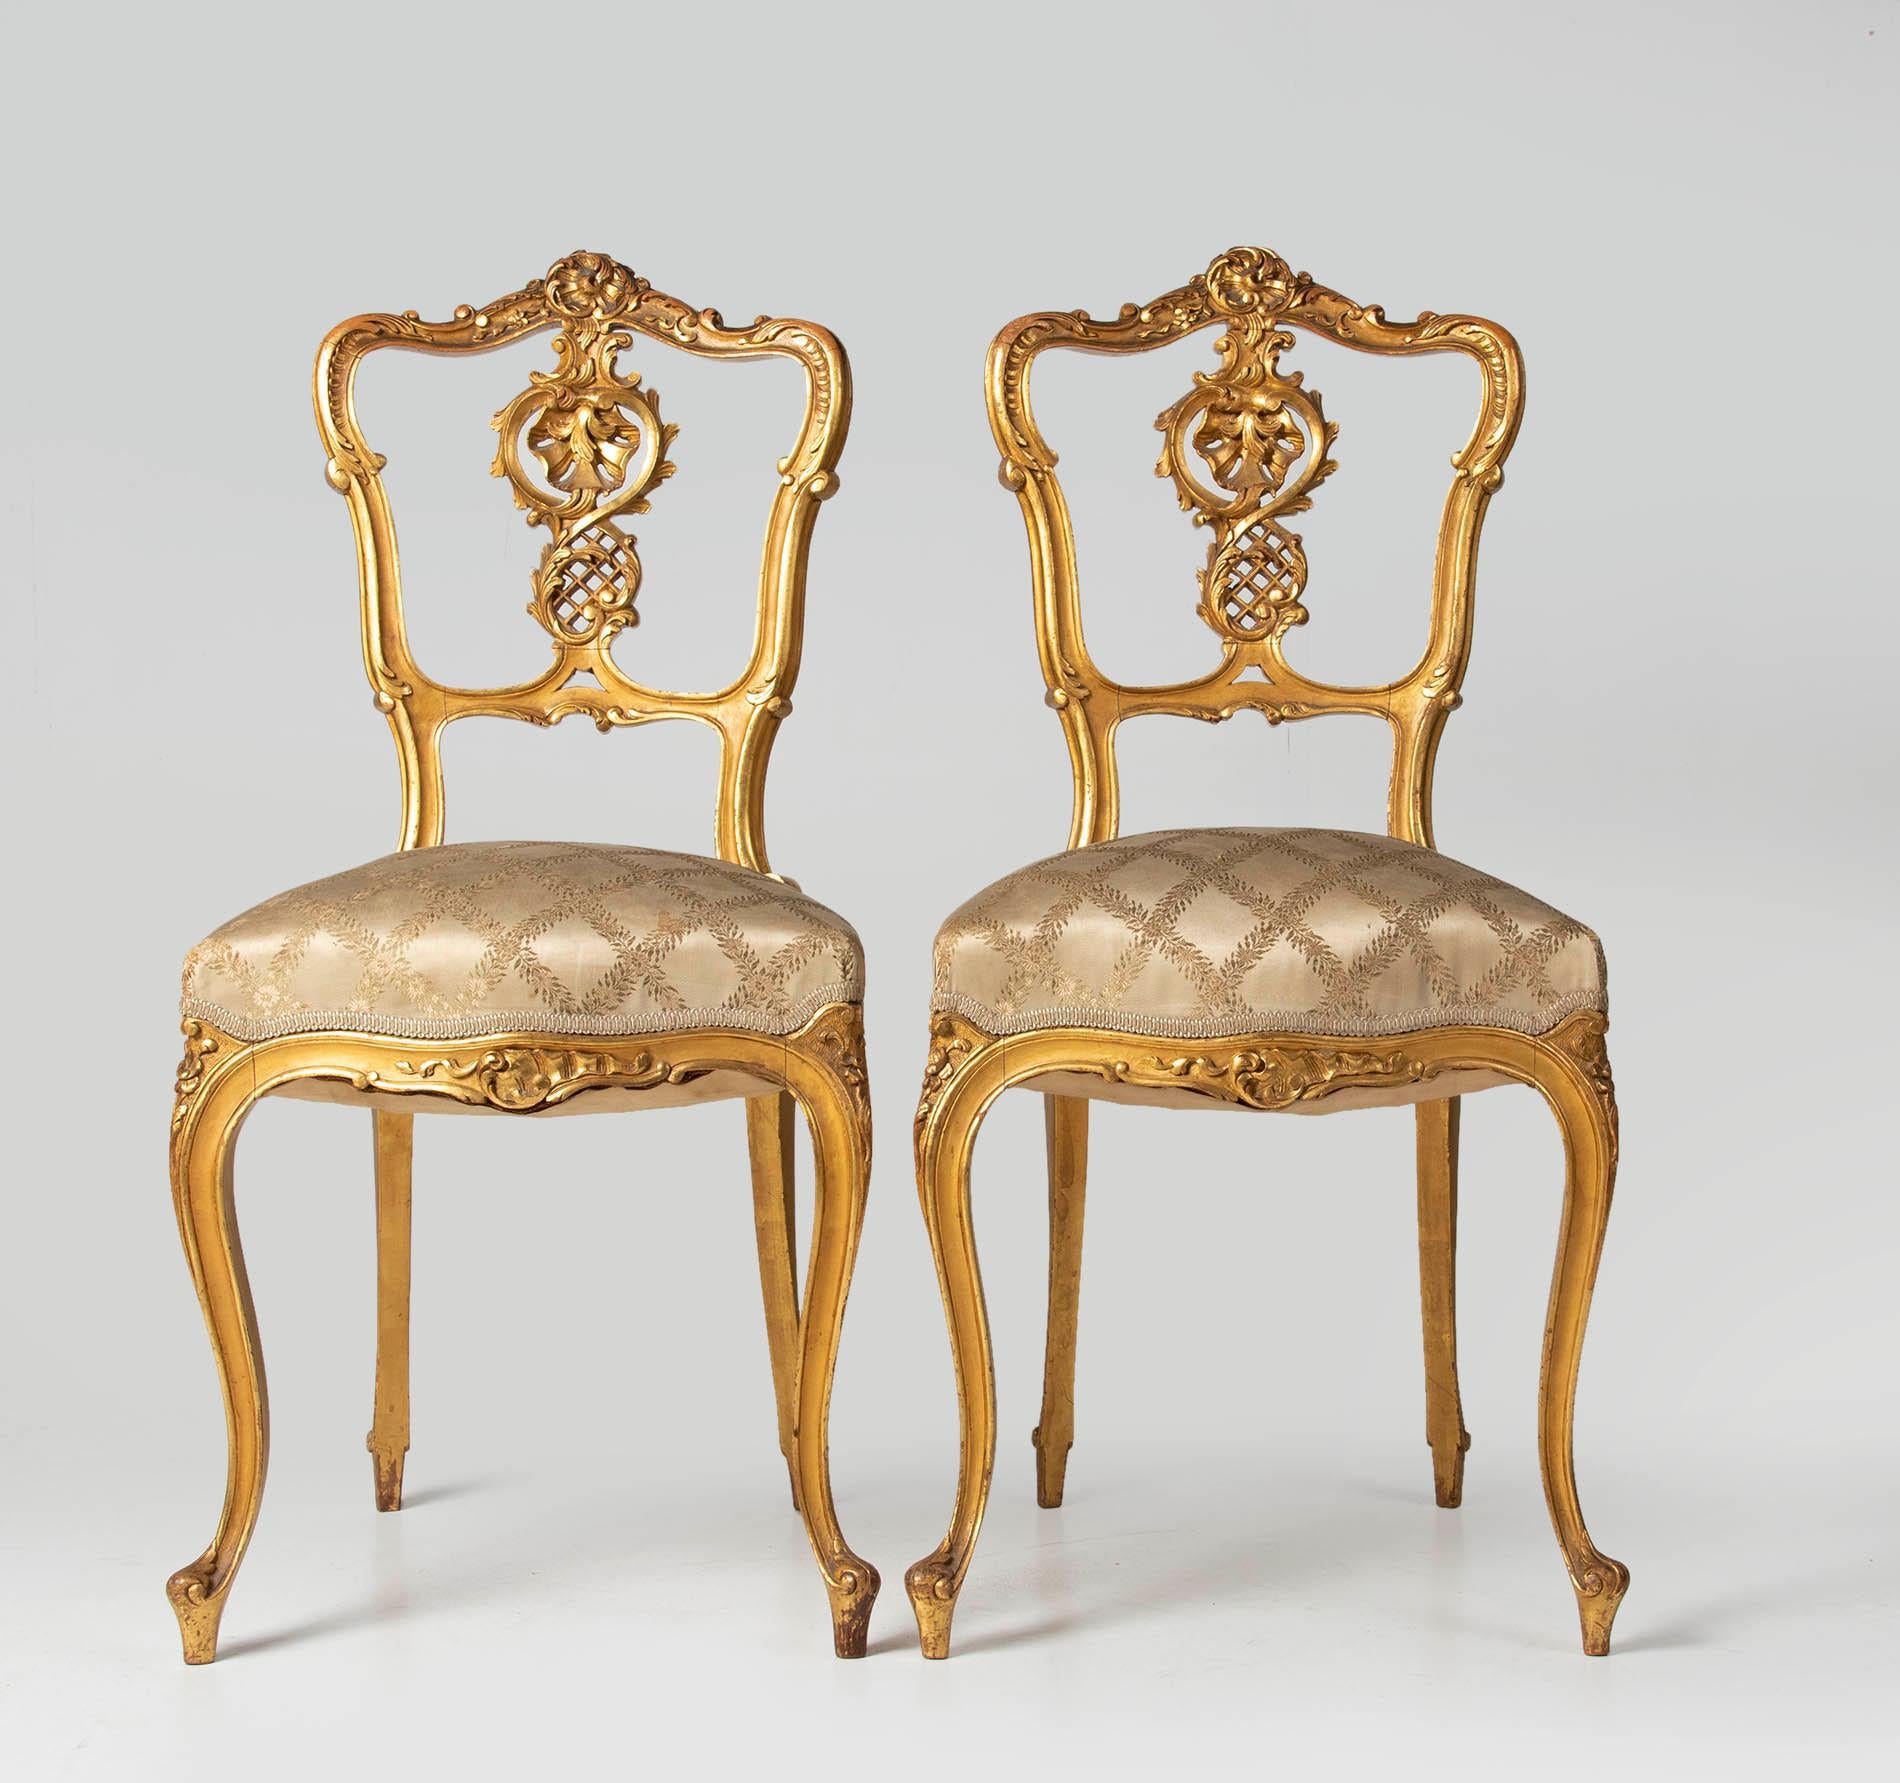 Two beautiful French side table. The chairs have refined Louis XV style carvings. The seats are gilded with gold leaf. The seats are covered with silk. The upholstery is somewhat worn, but not broken. These chairs have a beautiful old patina and